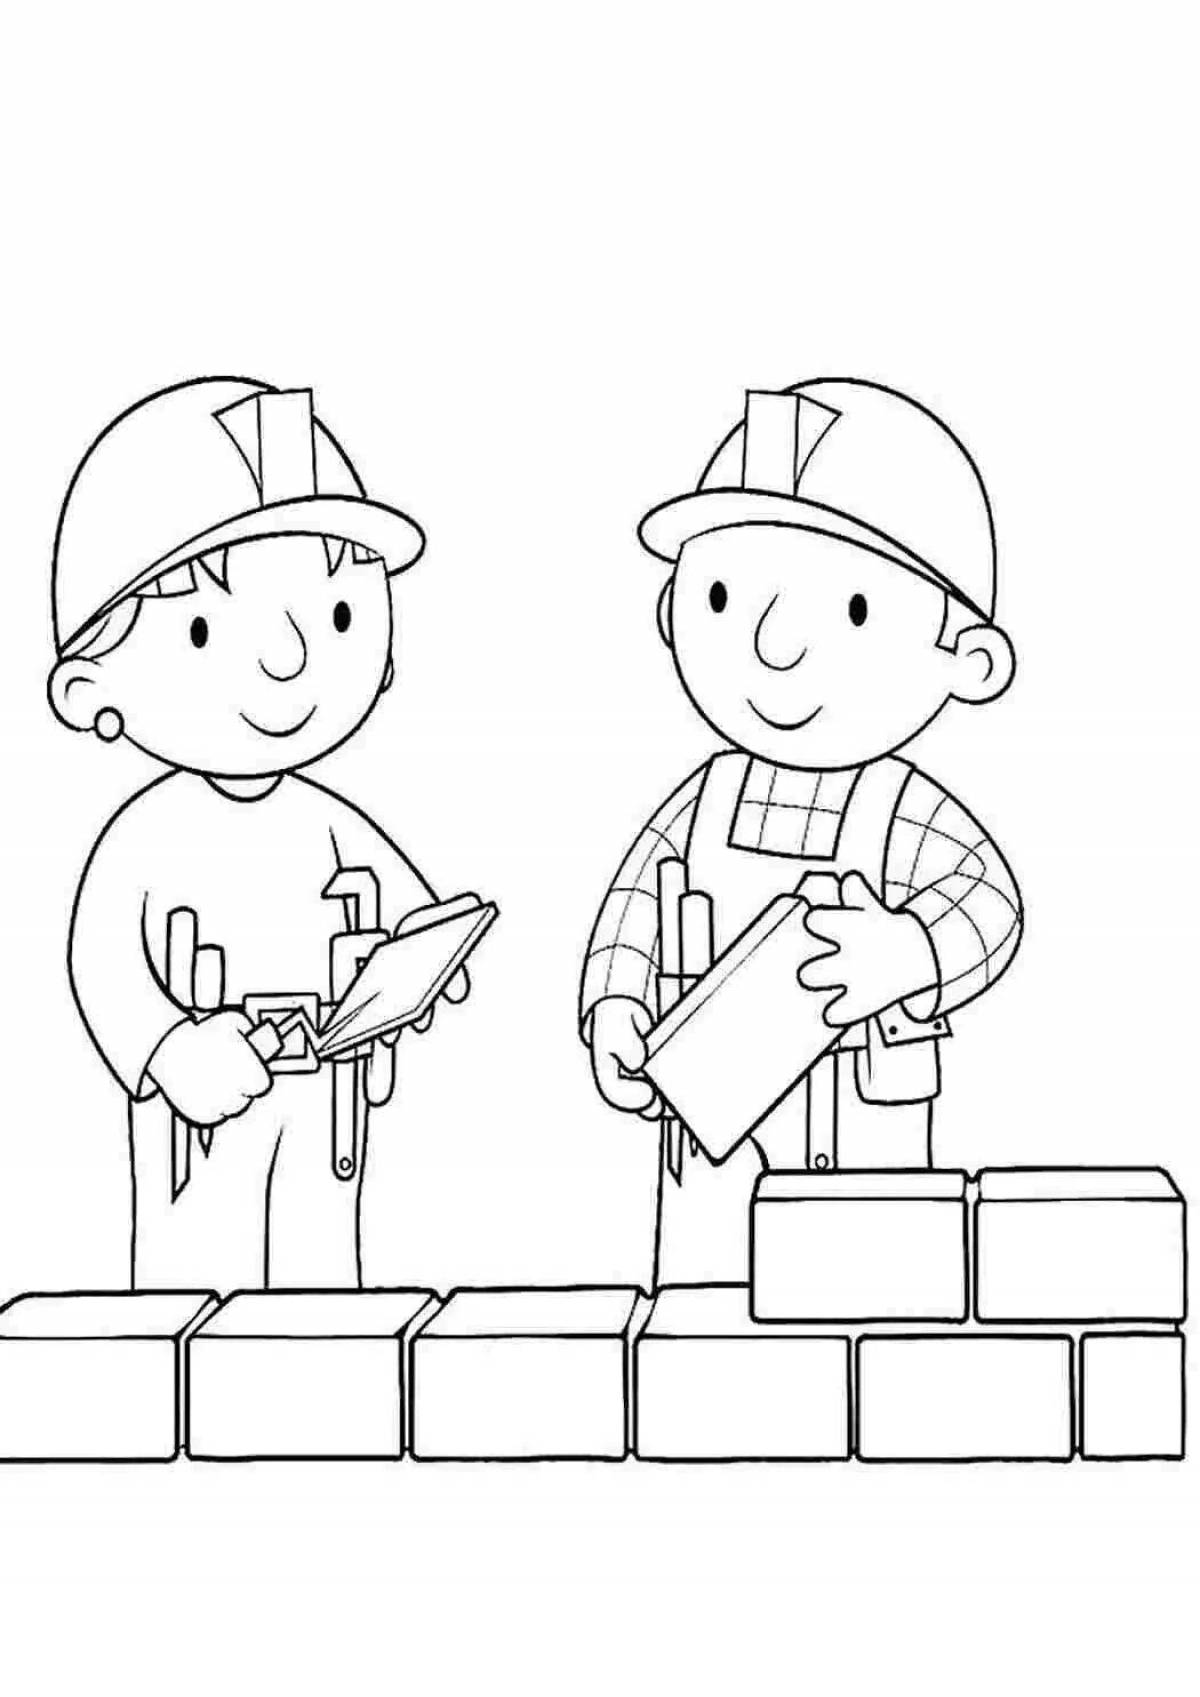 Fun coloring book safety for children